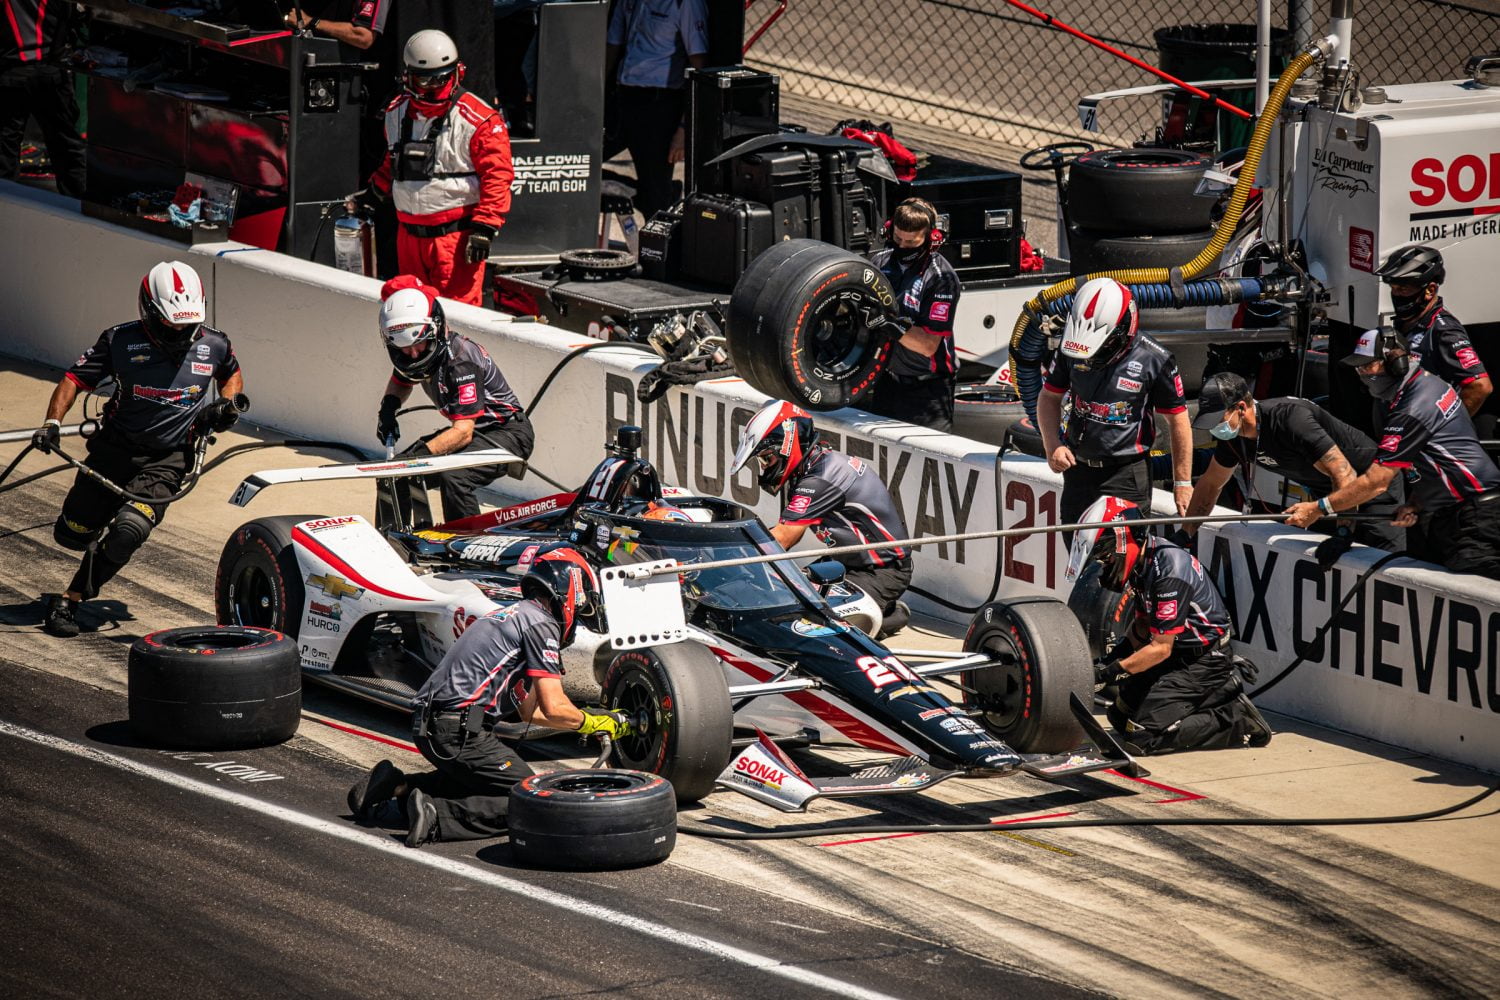 Indy 500 2020 Indy 500 Results 2020 Takuma Sato Wins Iconic Race for